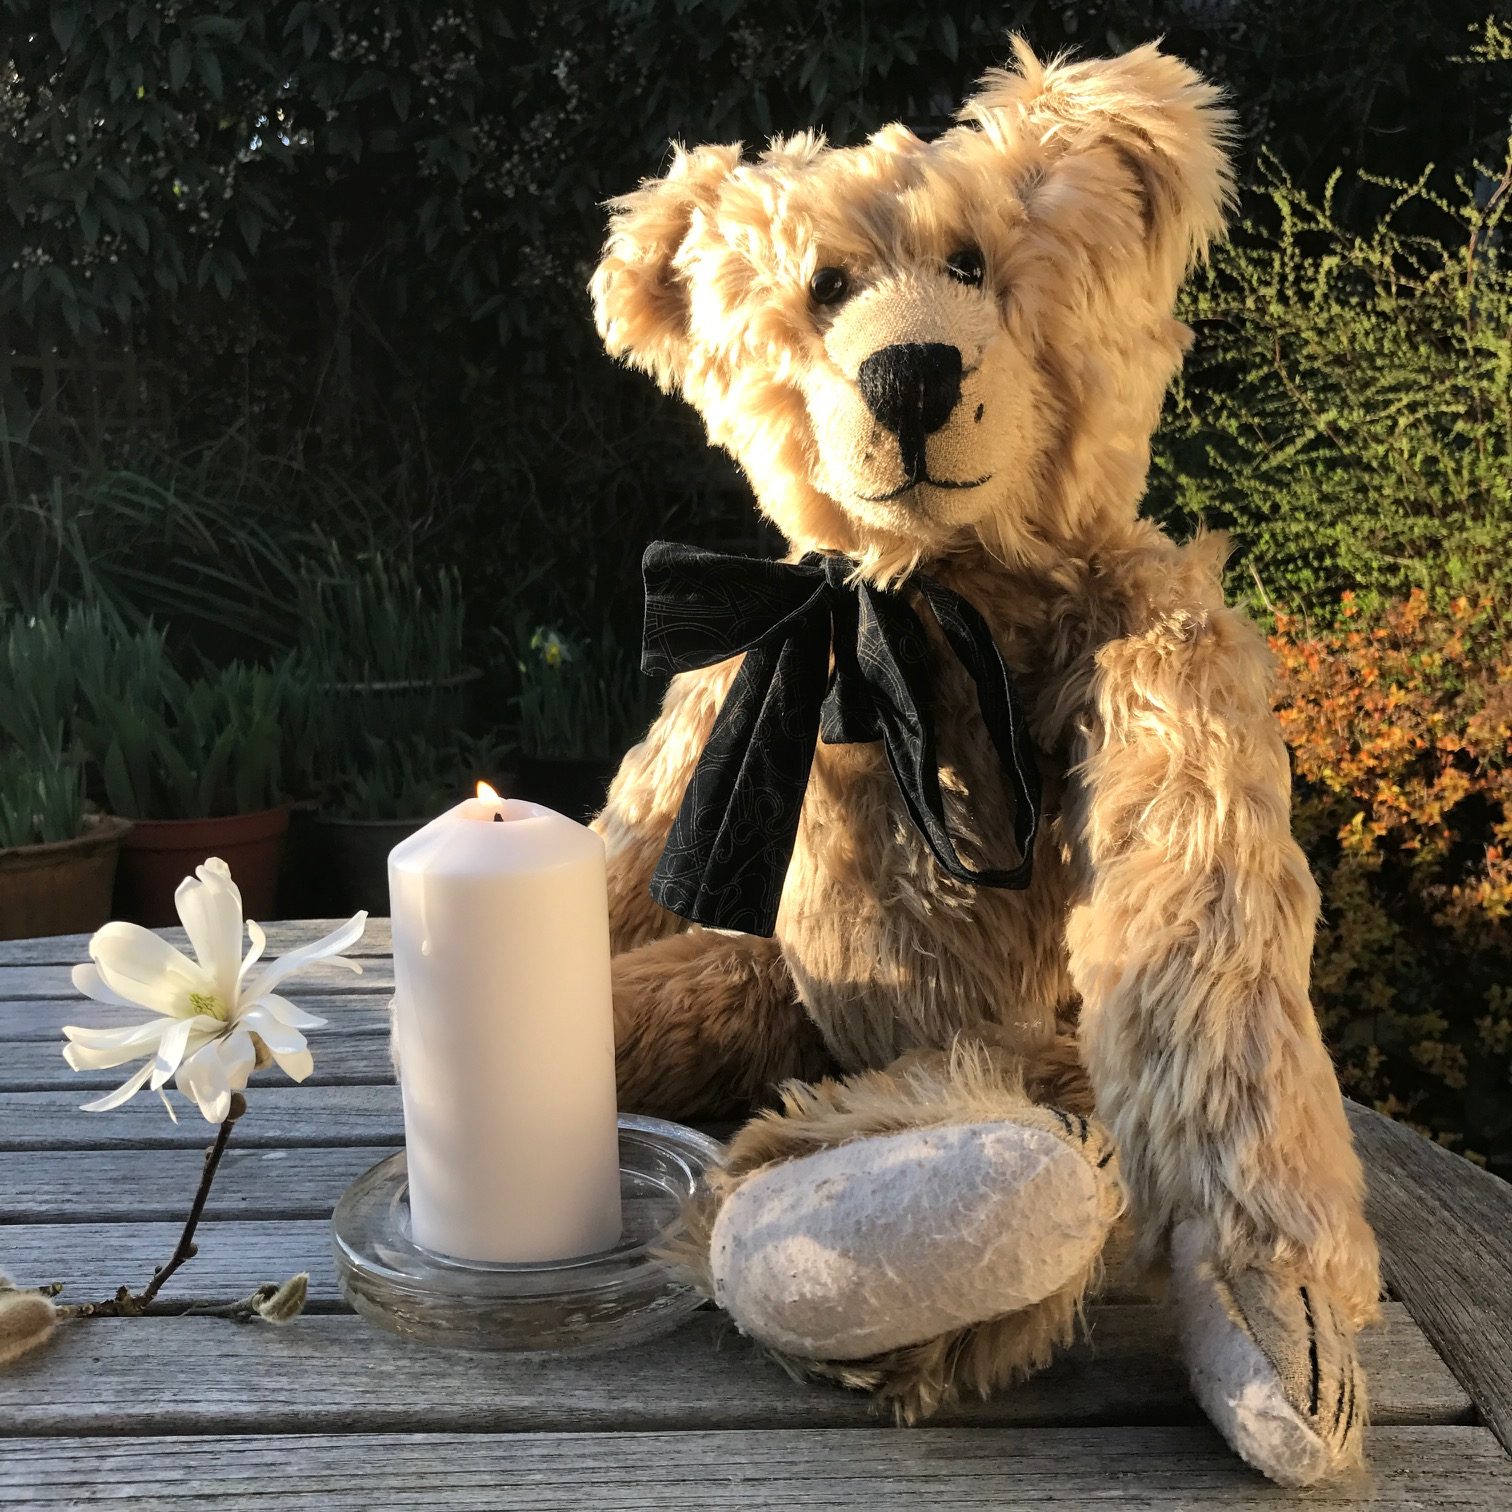 Good Grief - Lighting a Candle: Magnolia and Candle for Diddley.